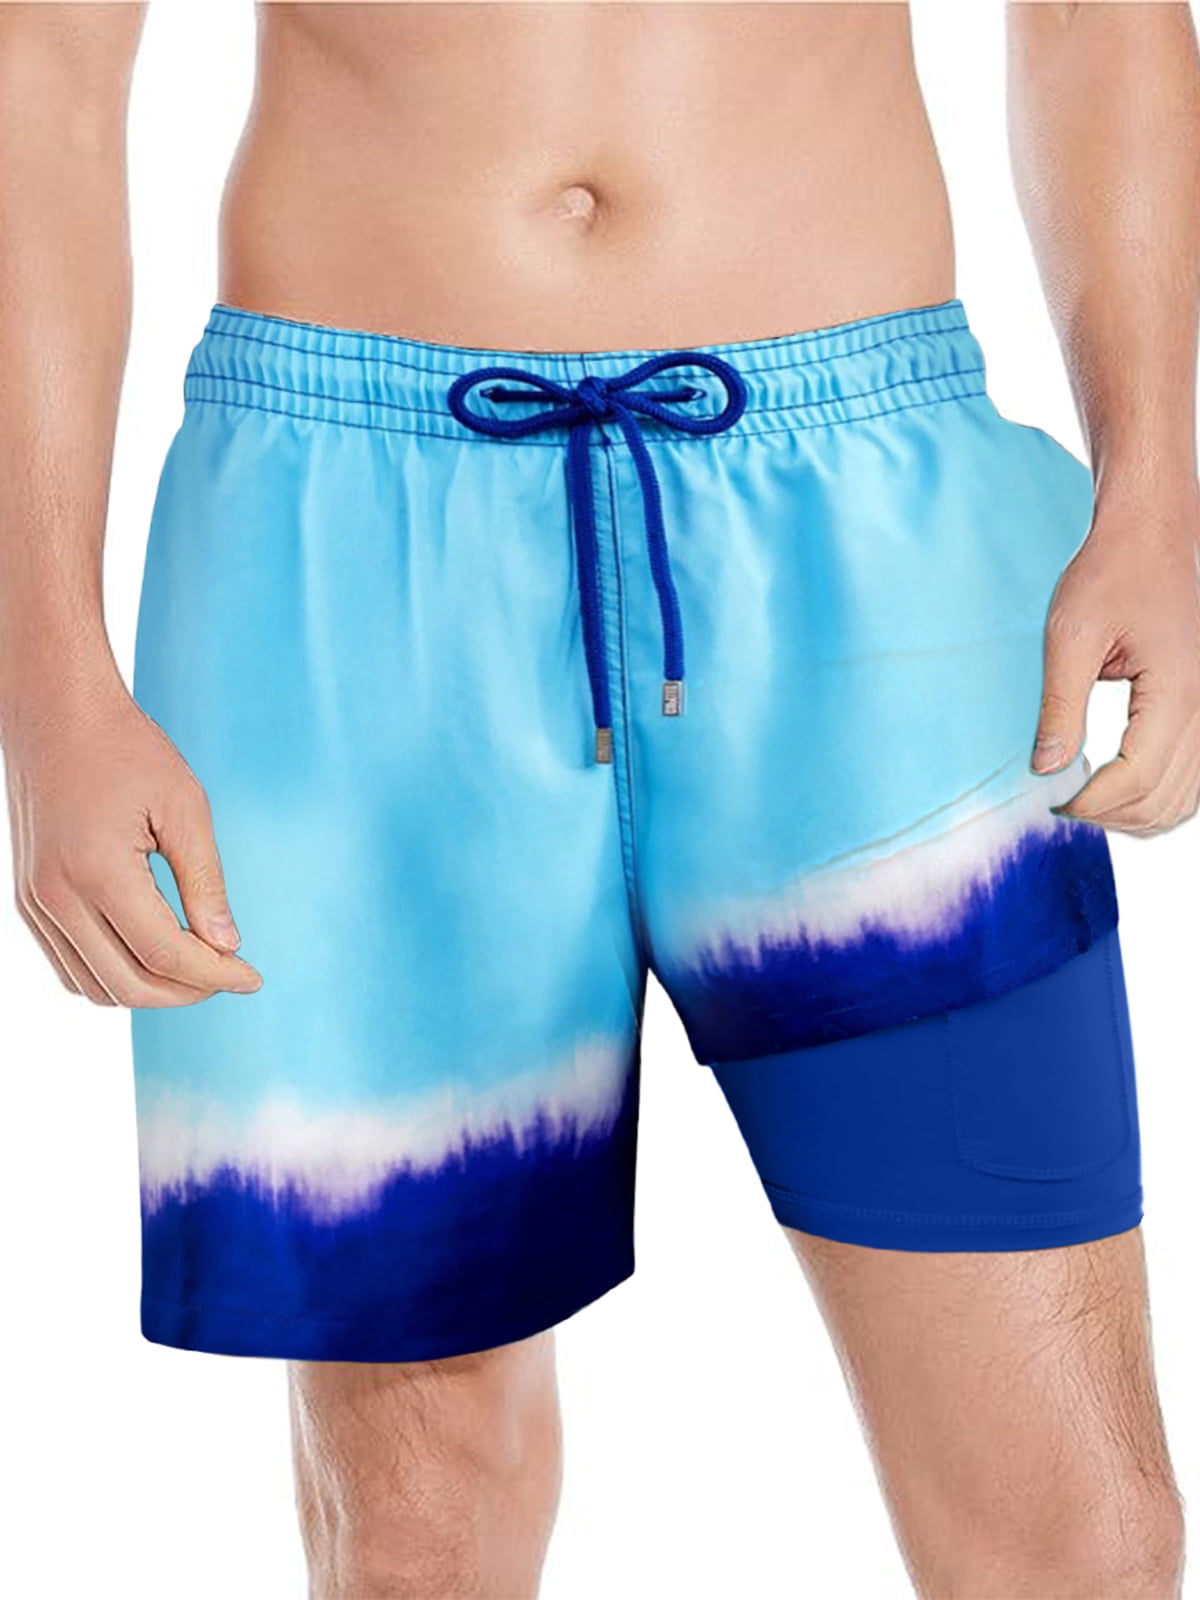 Inadays Men's Swim Trunks with Mesh Lining Quick Dry Sports Shorts